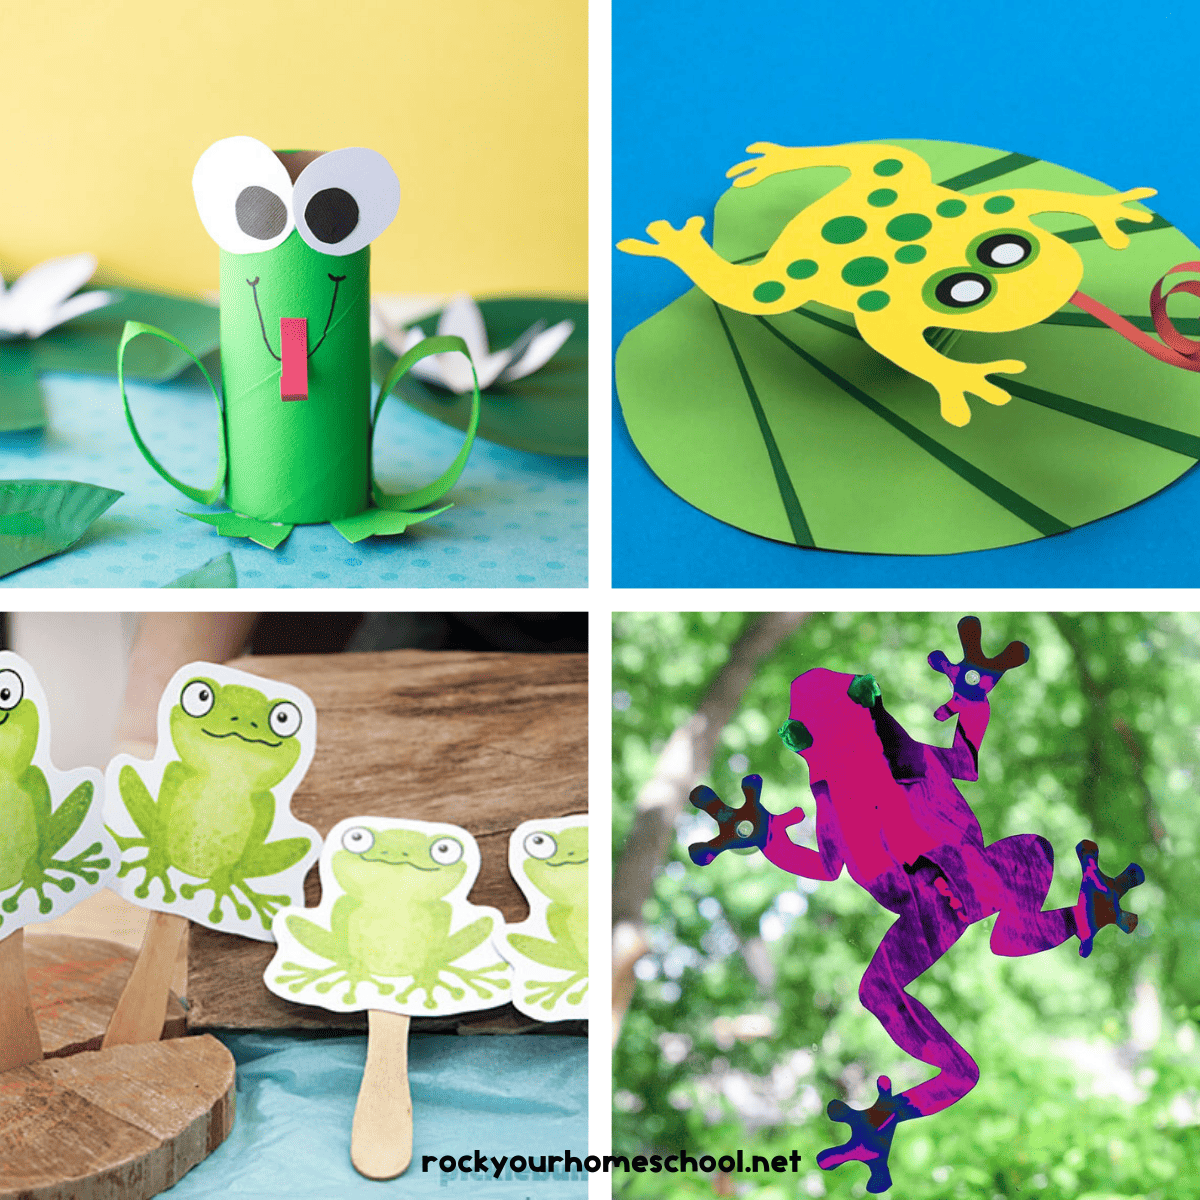 15 Fun and Easy Frog Crafts for Kids to Make and Enjoy- Rock Your Homeschool